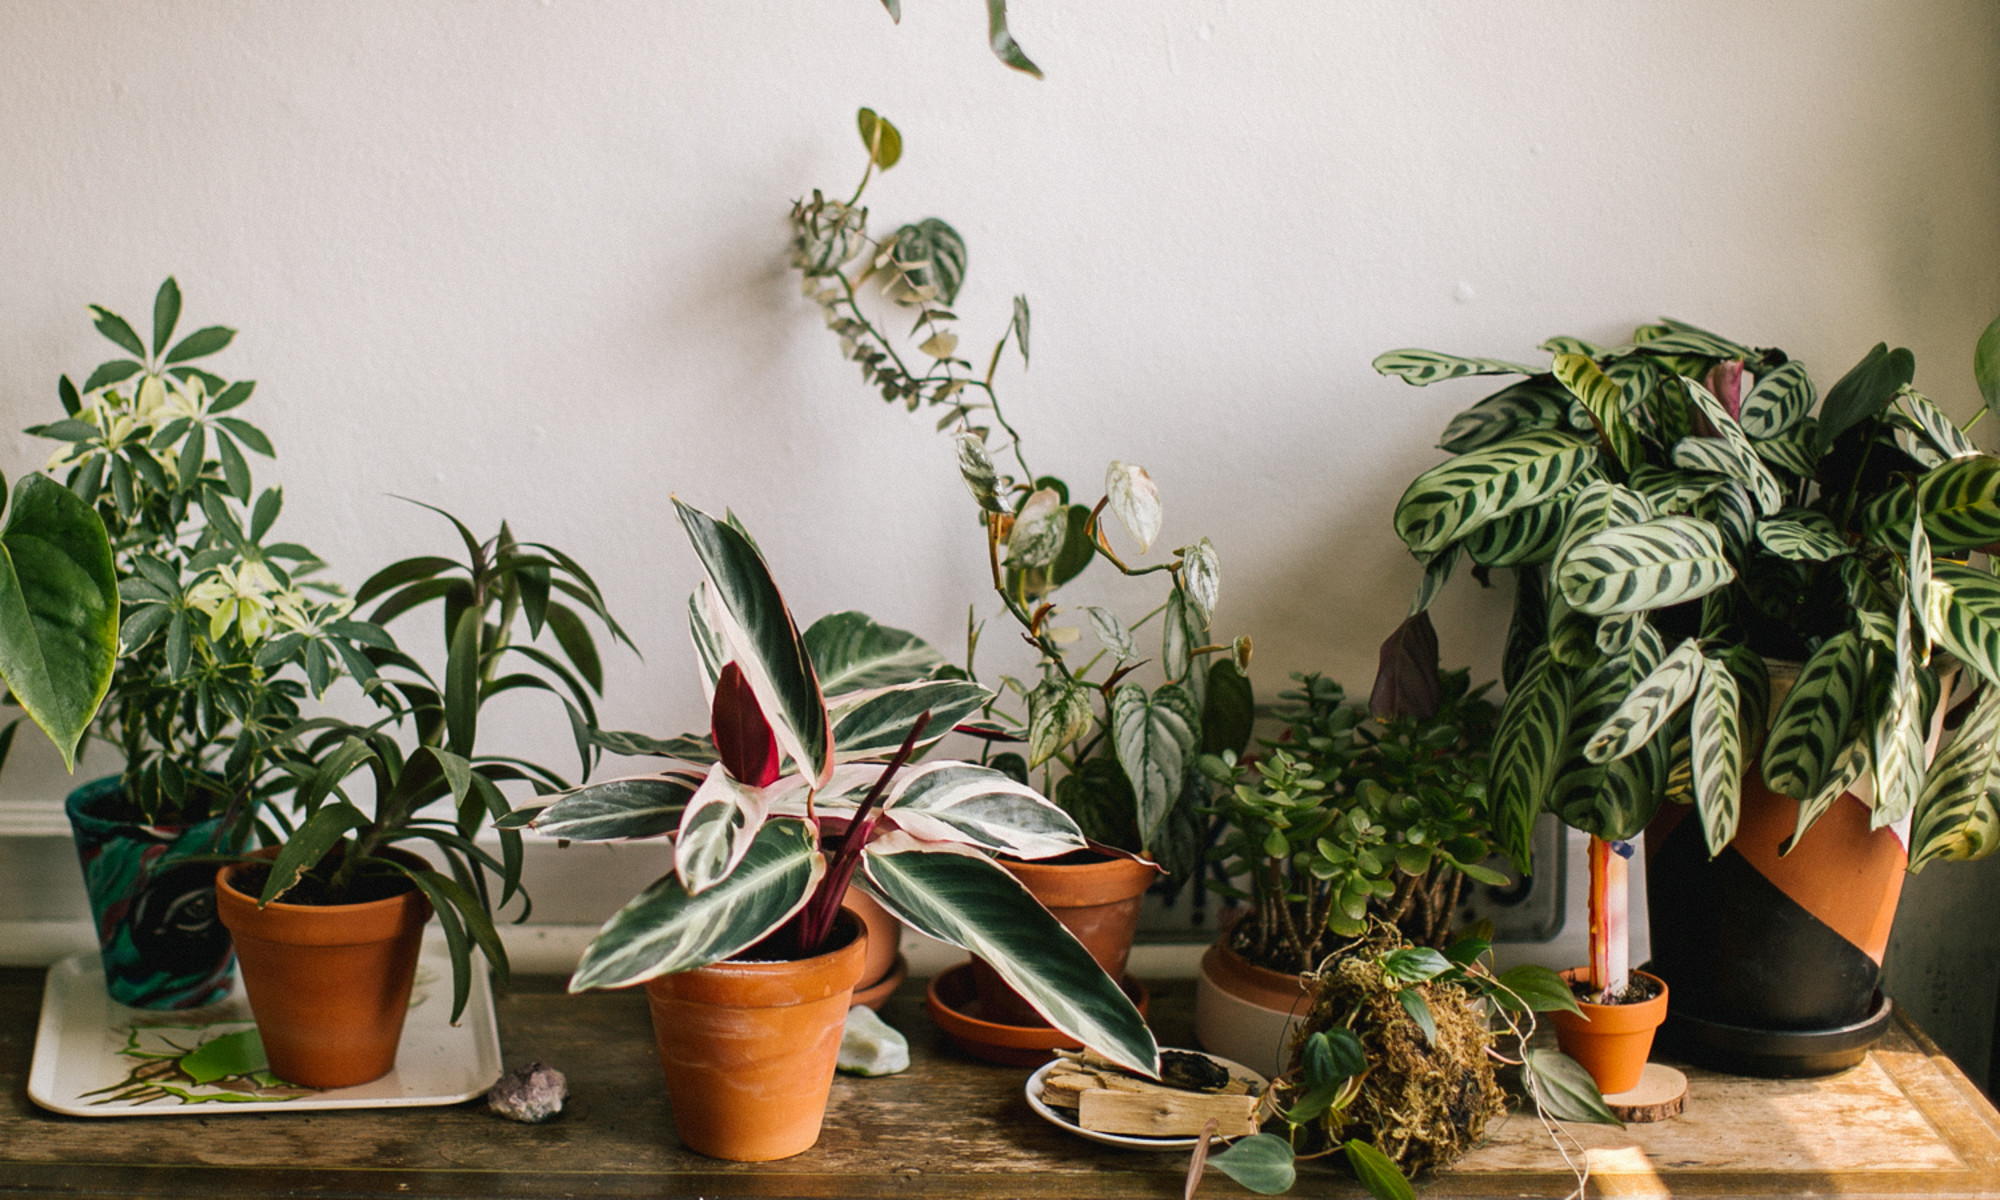 7 Houseplants That Purify The Air (And Are Nearly Impossible To Kill)